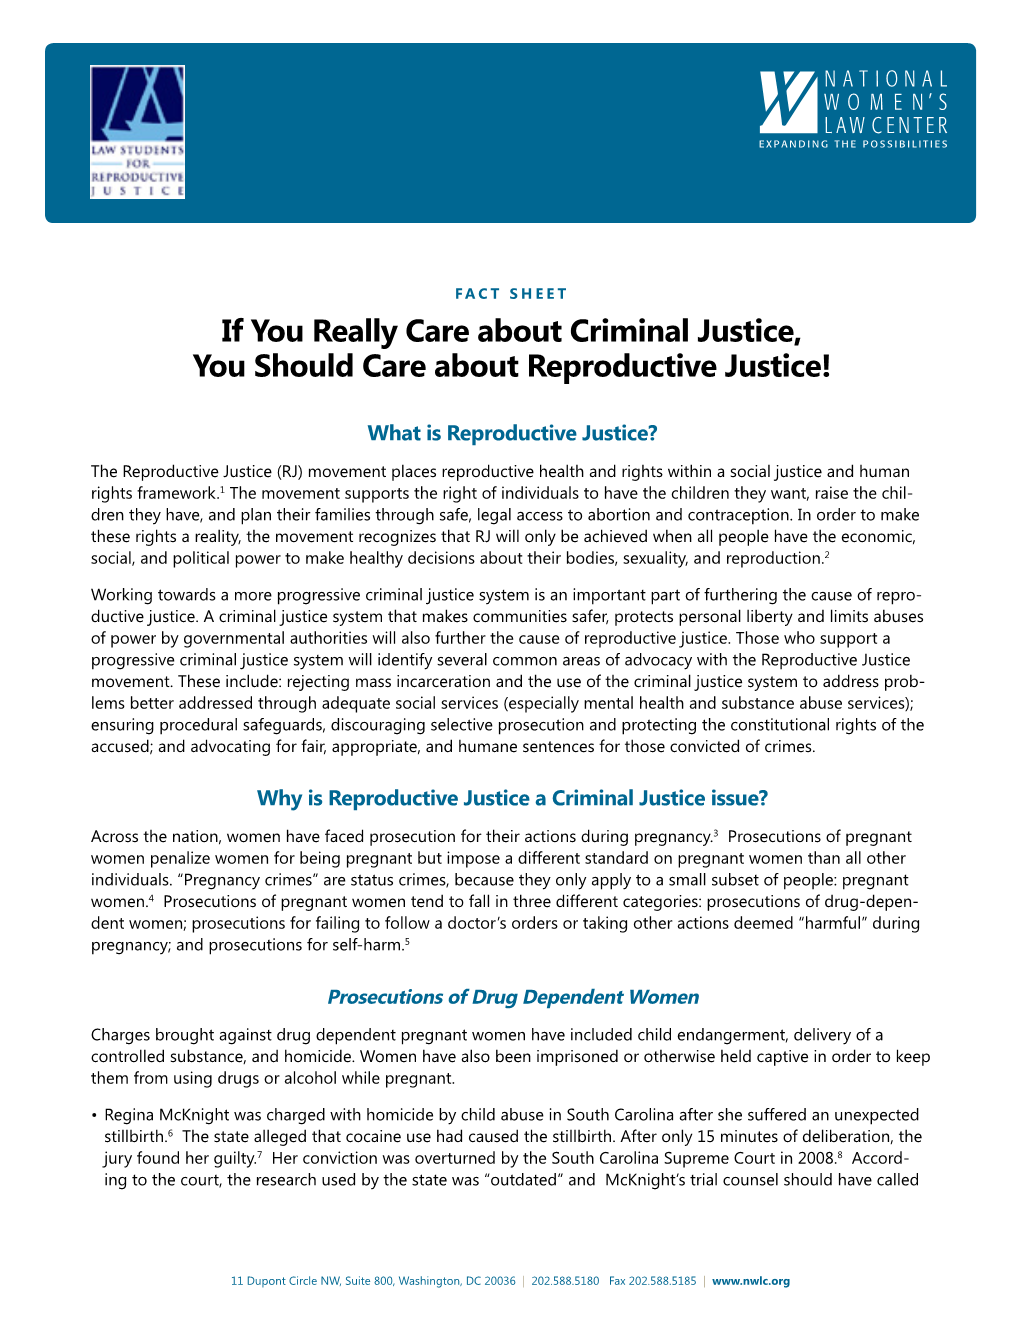 If You Really Care About Criminal Justice, You Should Care About Reproductive Justice • Fact Sheet